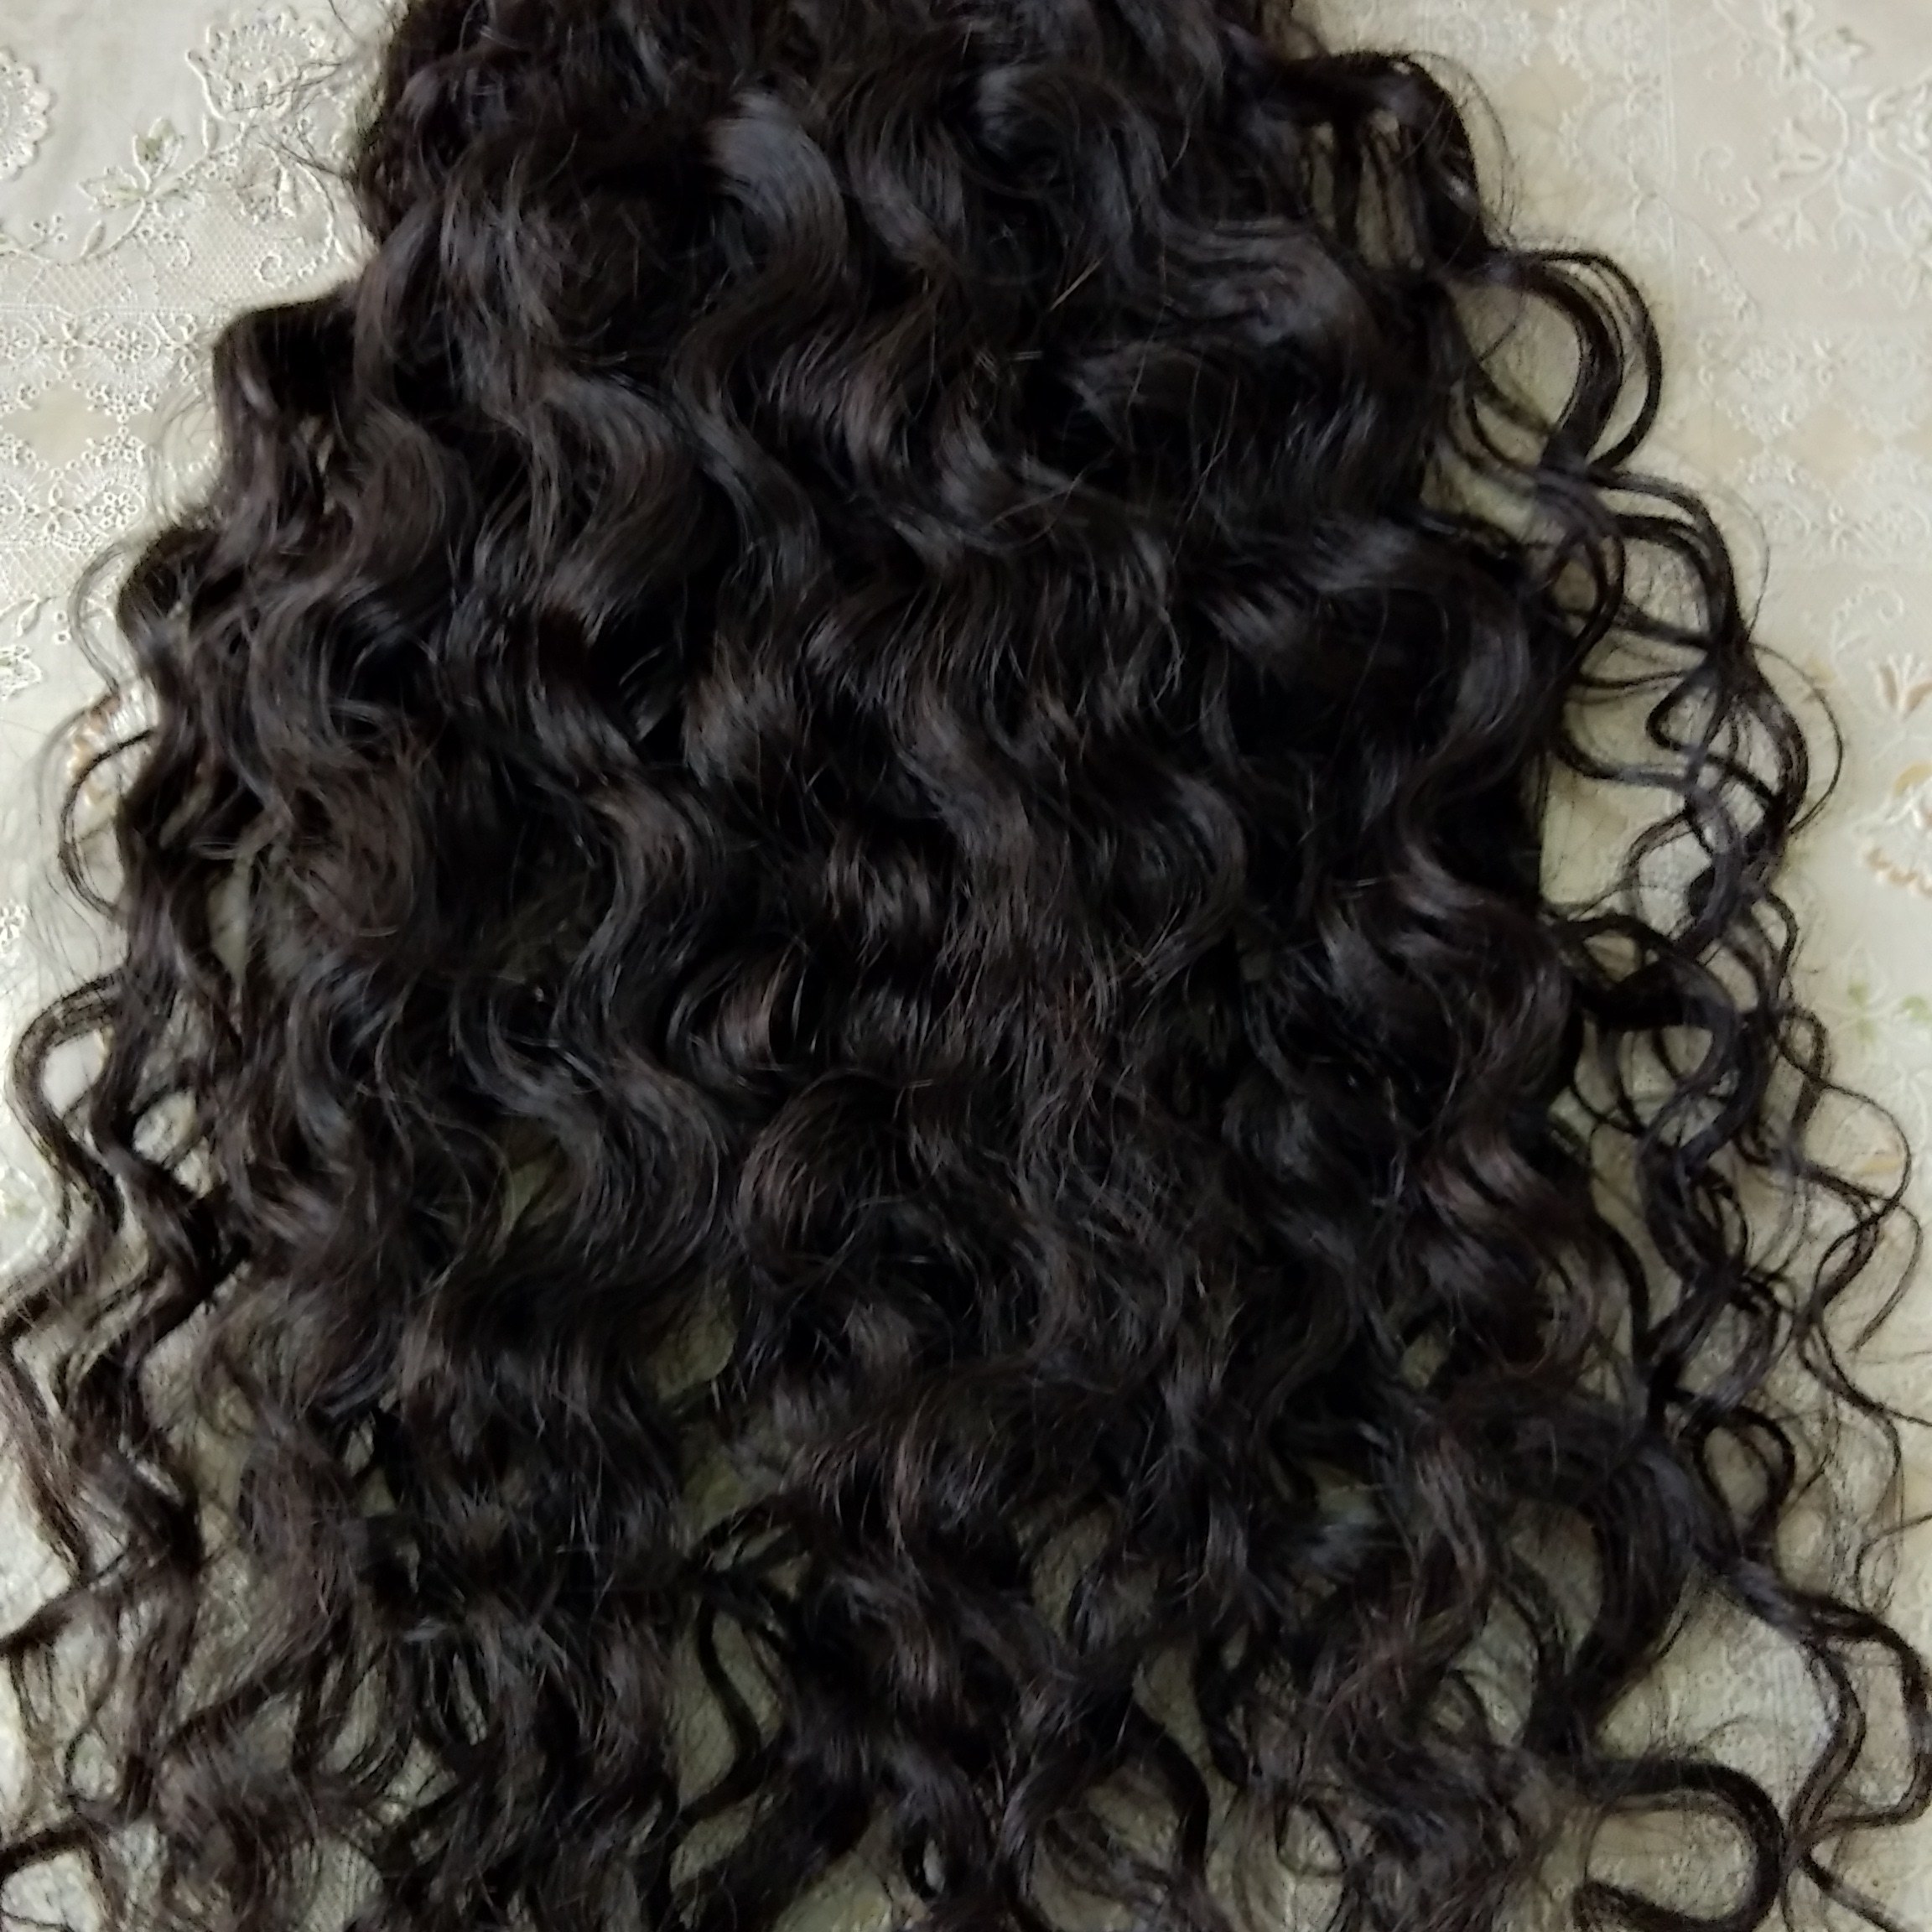 Indian Temple Soft Curly Hair